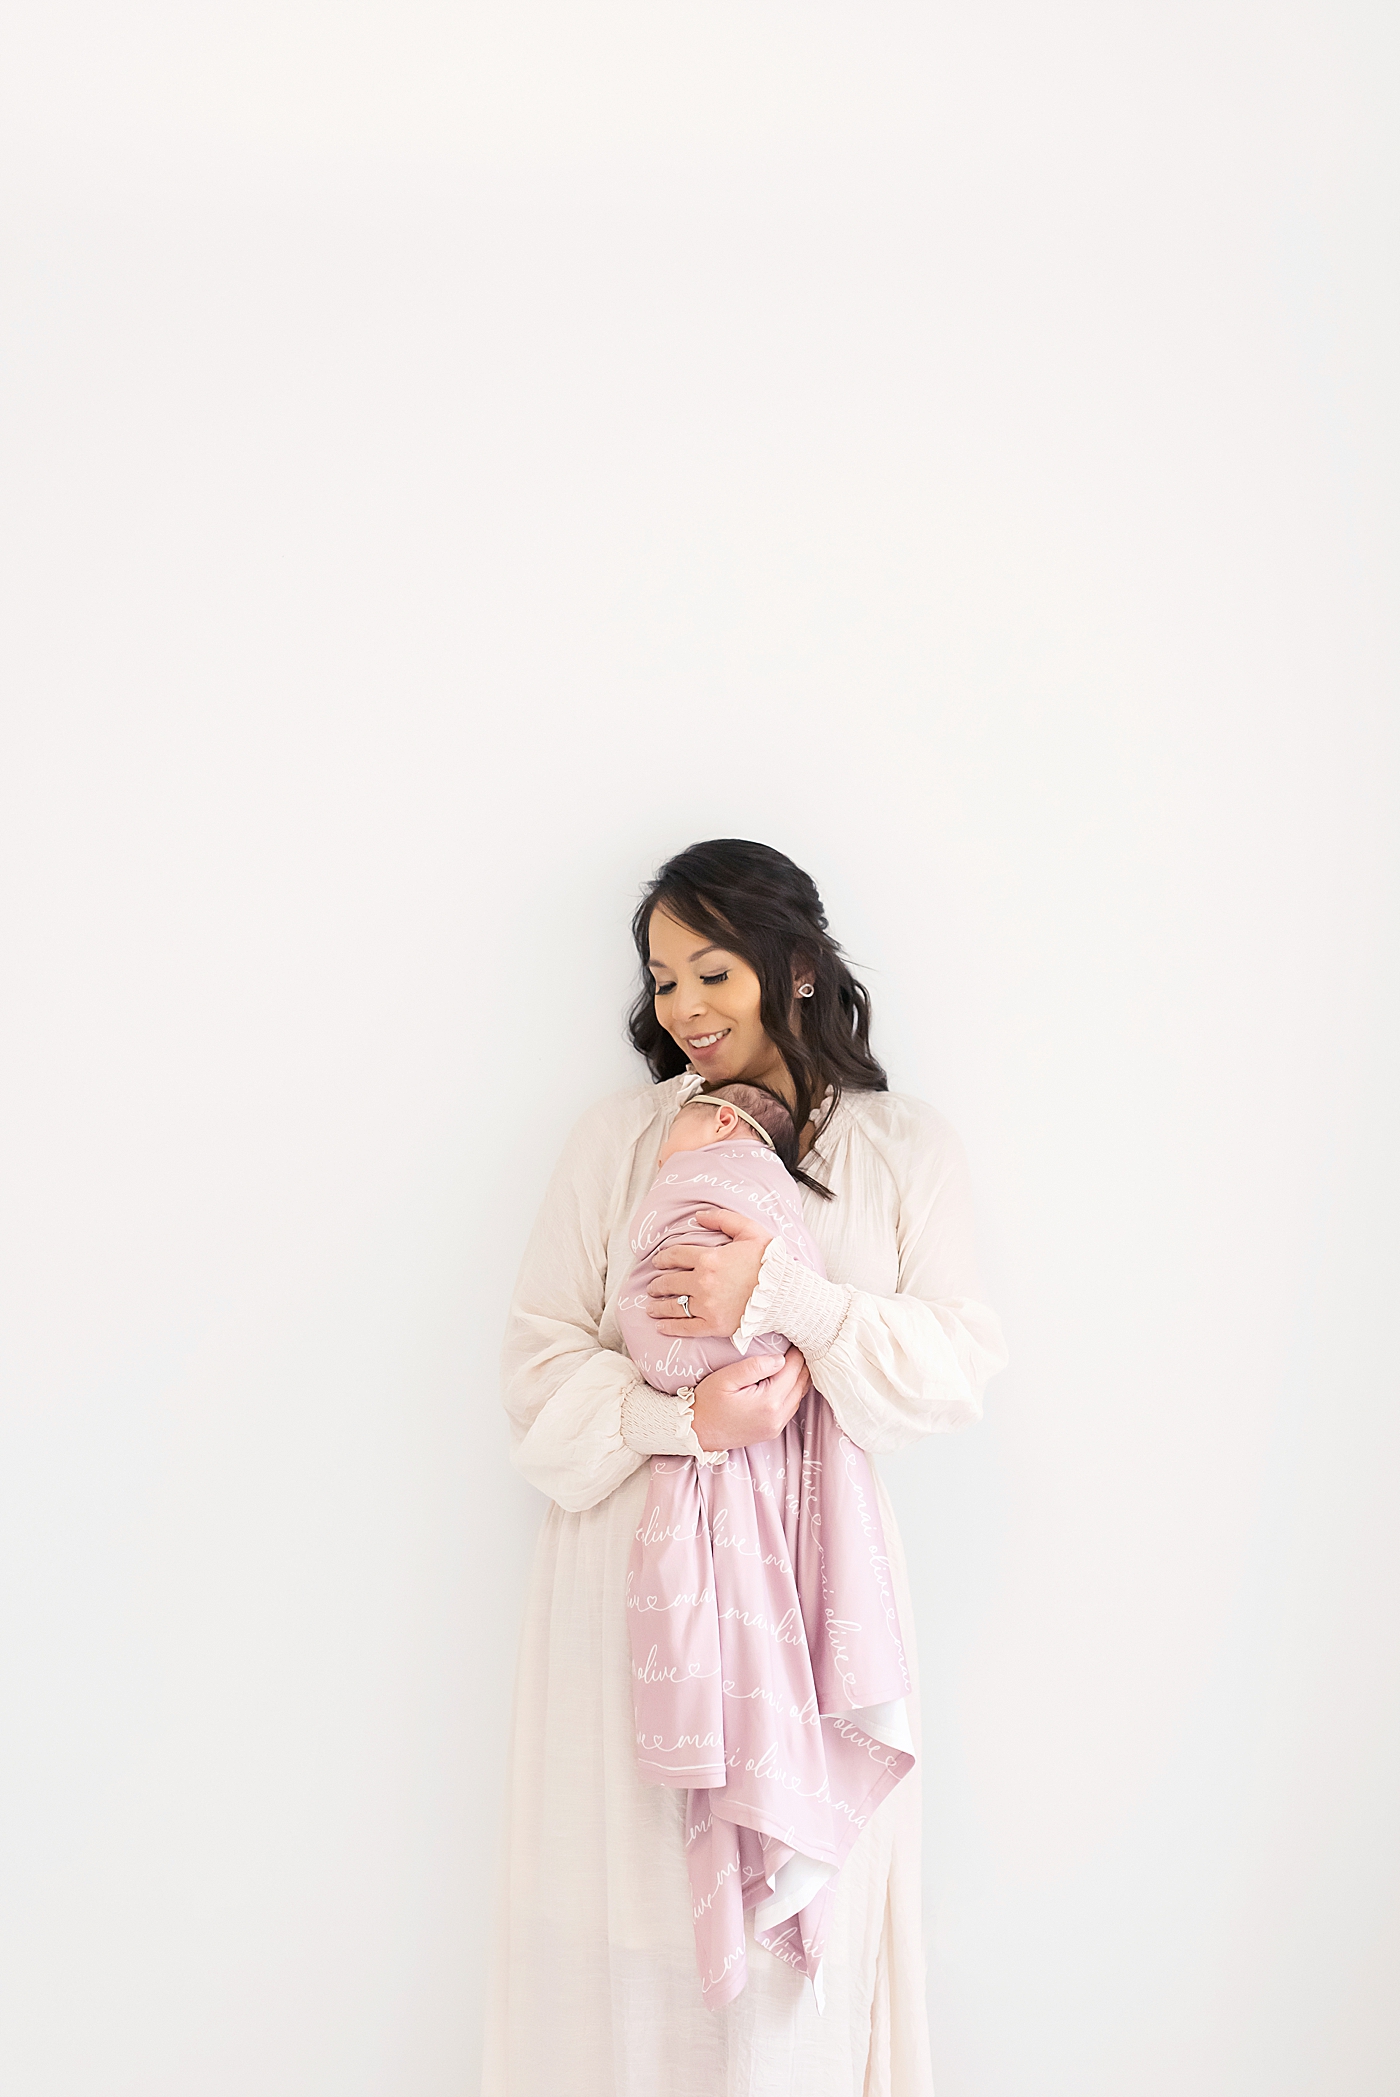 Newborn studio session for baby girl wrapped in pink held by mom | Photo by Anna Wisjo Photography